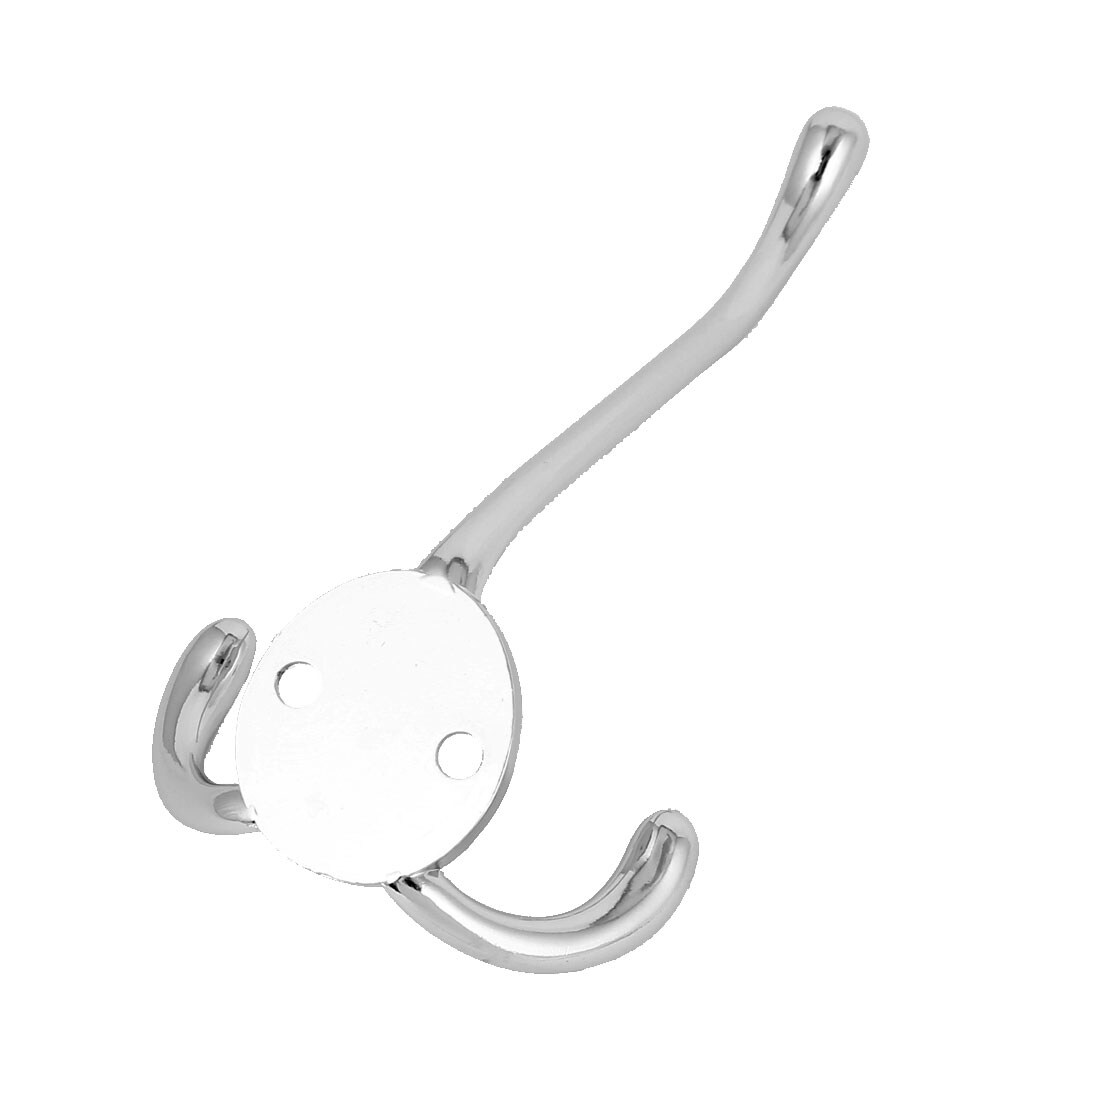 Coat Towel Stainless Steel Round Shaped Single Hook Wall Hanger 120mm Long  5pcs